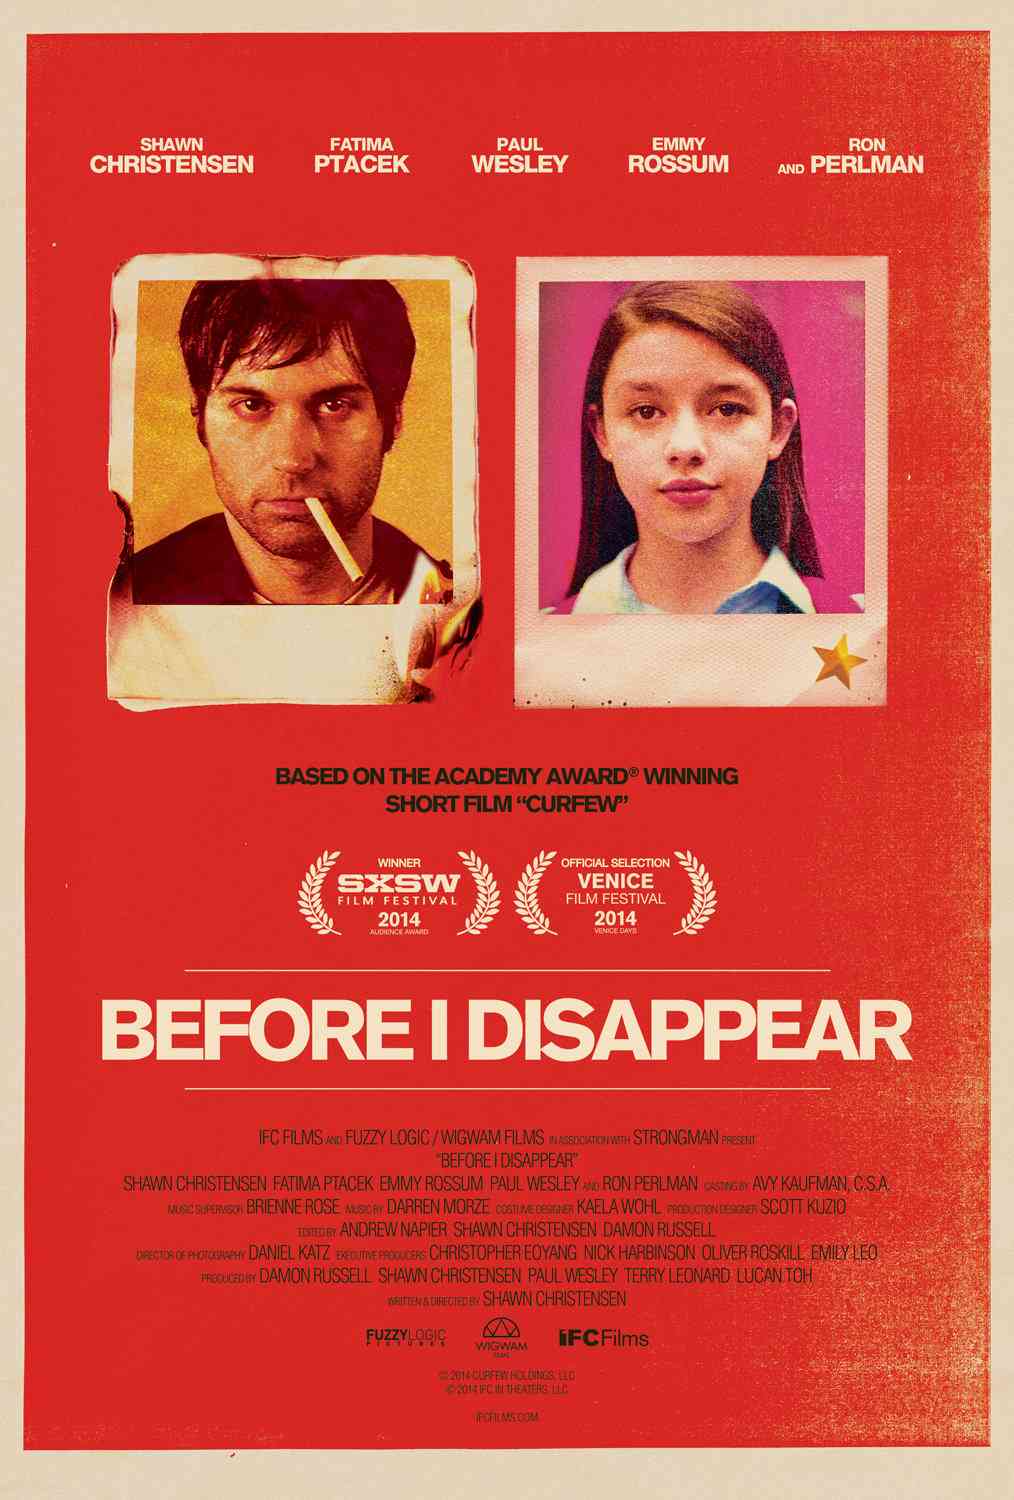 FULL MOVIE: Before I Disappear (2014)